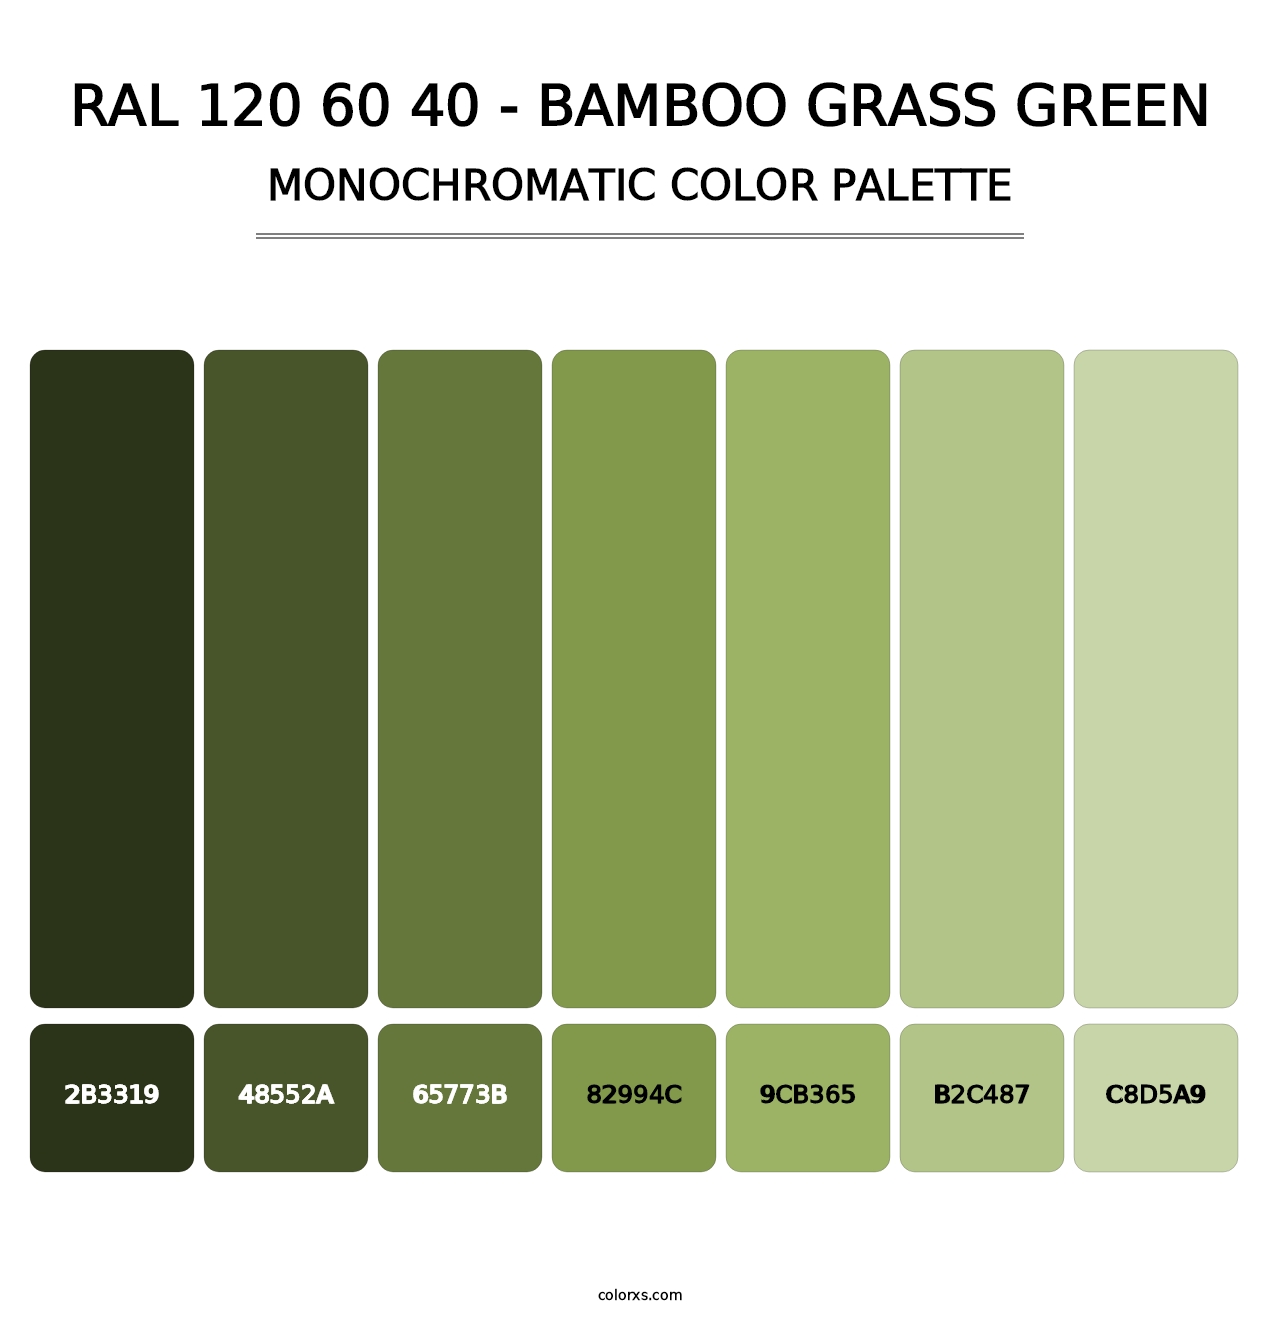 RAL 120 60 40 - Bamboo Grass Green - Monochromatic Color Palette